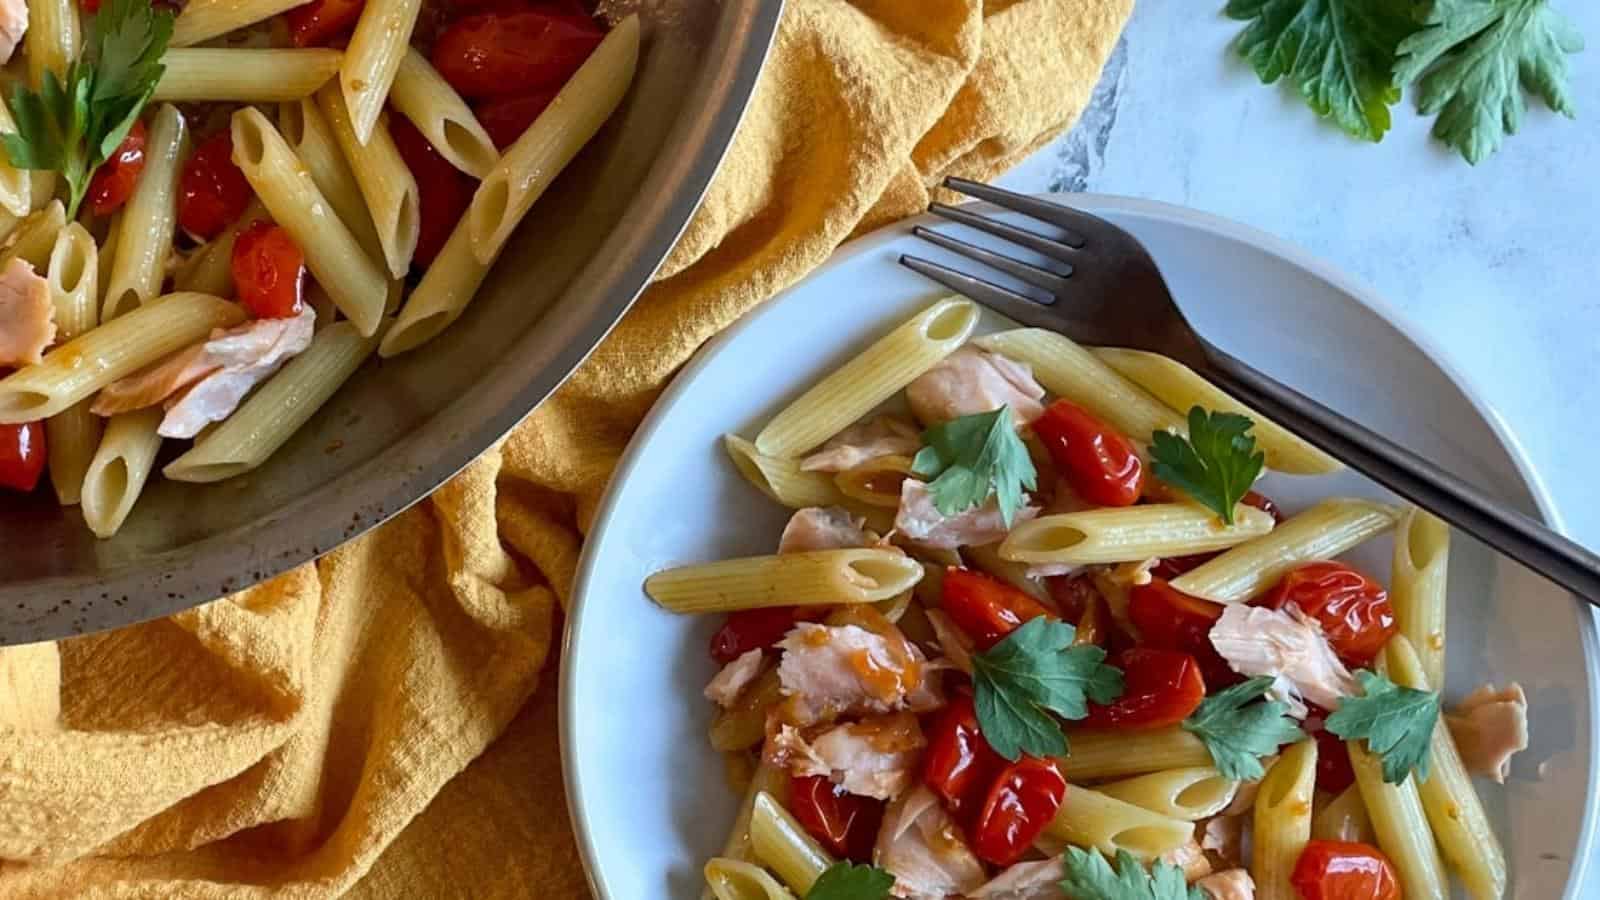 Penne pasta with burst cherry tomatoes, shallots, garlic, and parsley on white plate next to a pan filled with pasta.